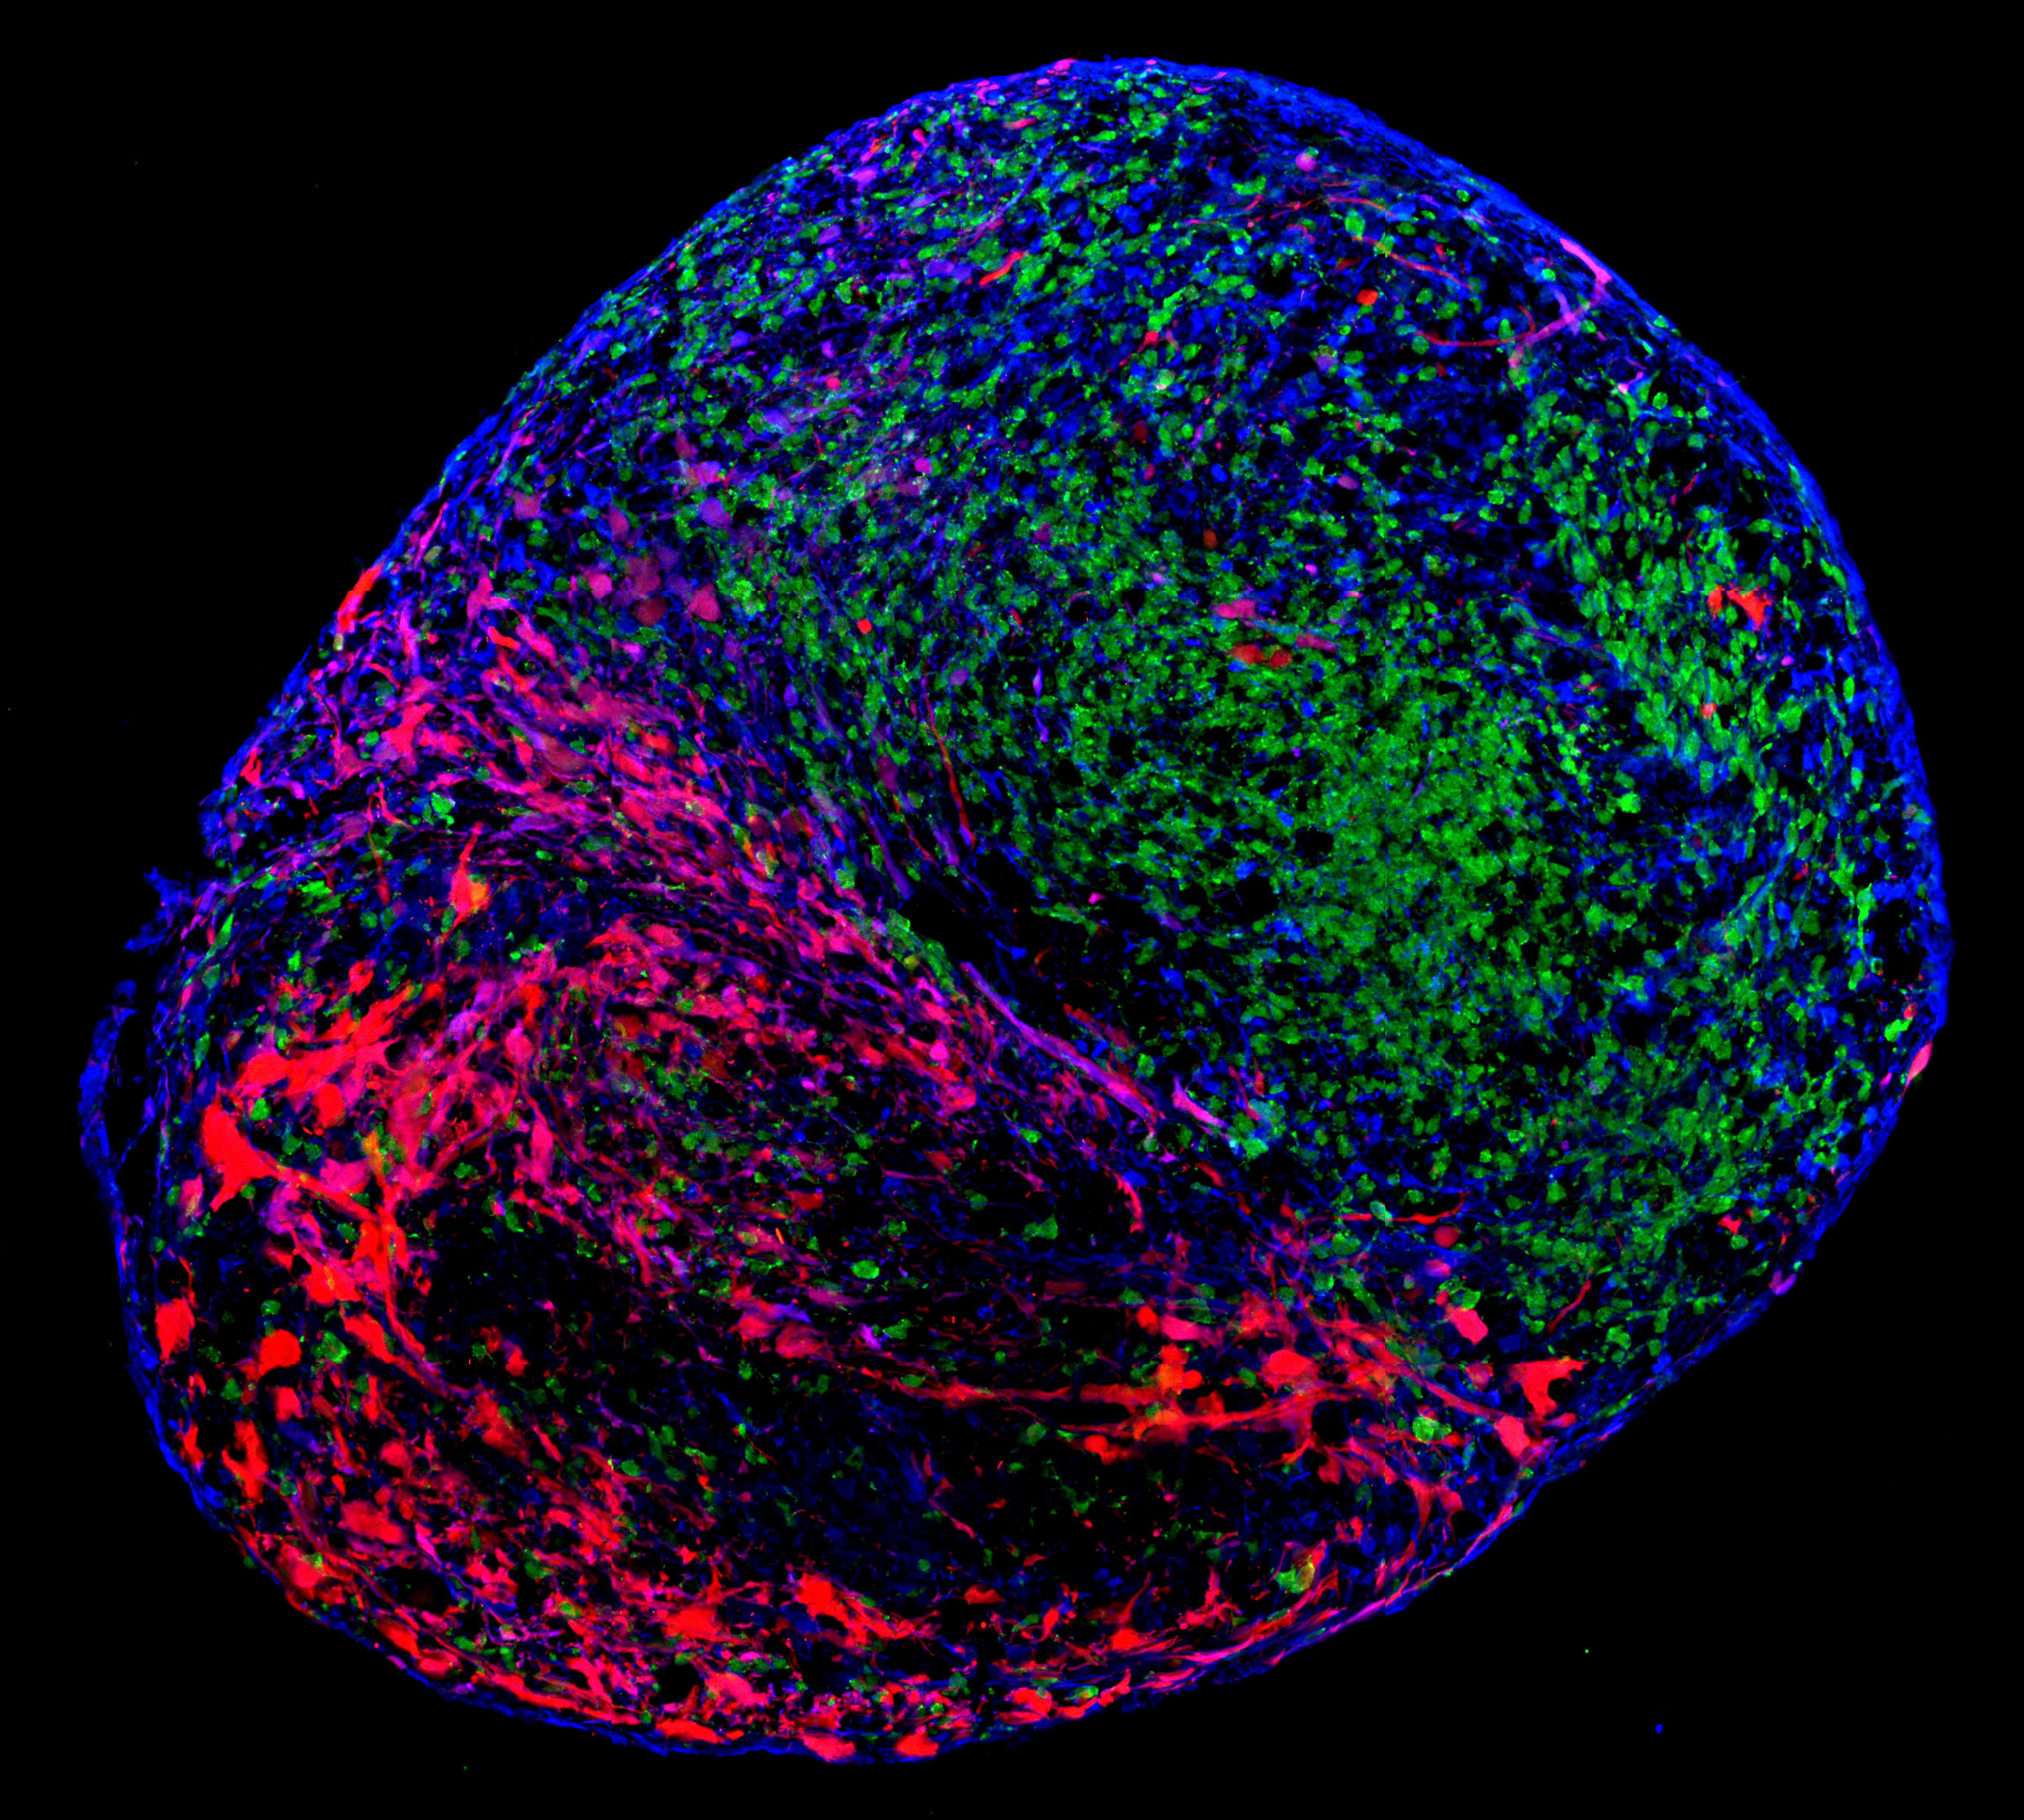 Fluorescent microscopy of a rounded structure containing many cells colored in green, blue, red, and pink.